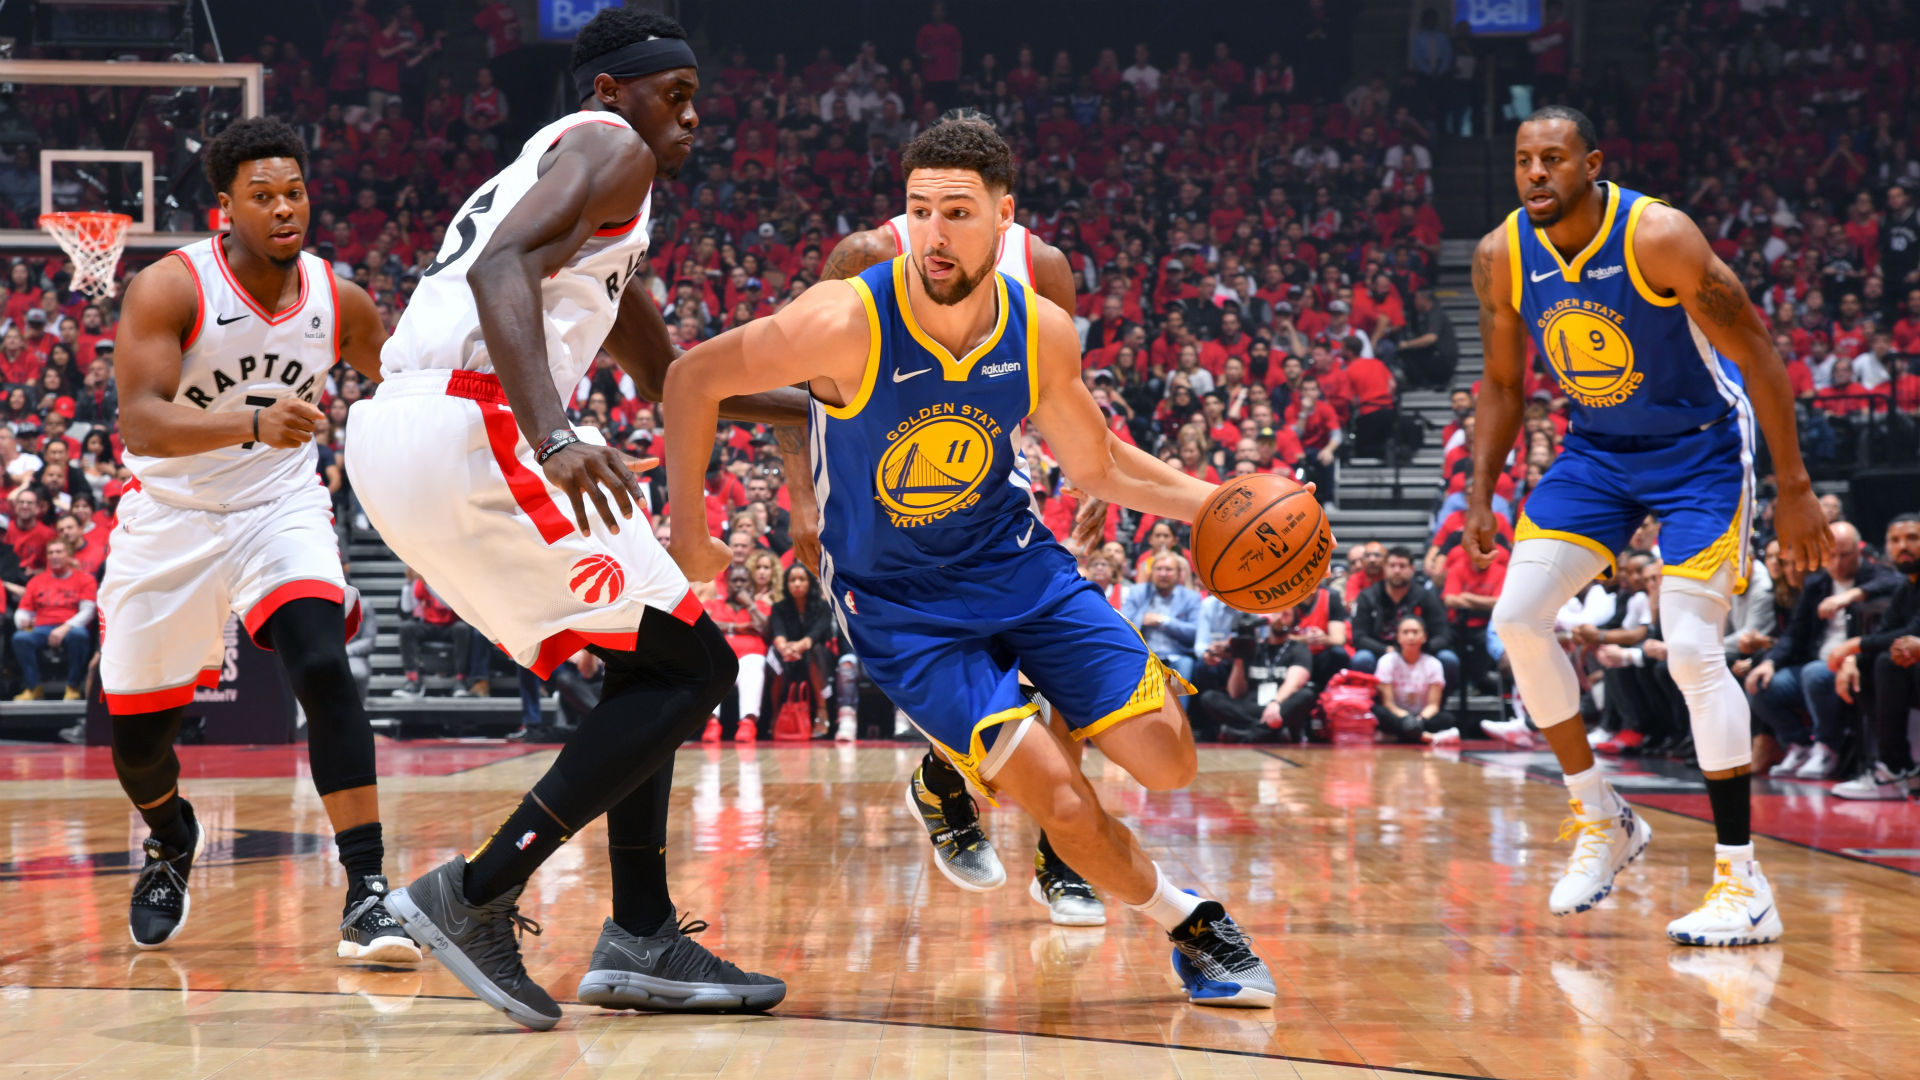 NBA Finals 2019 Inside Golden State's historic run that doomed the